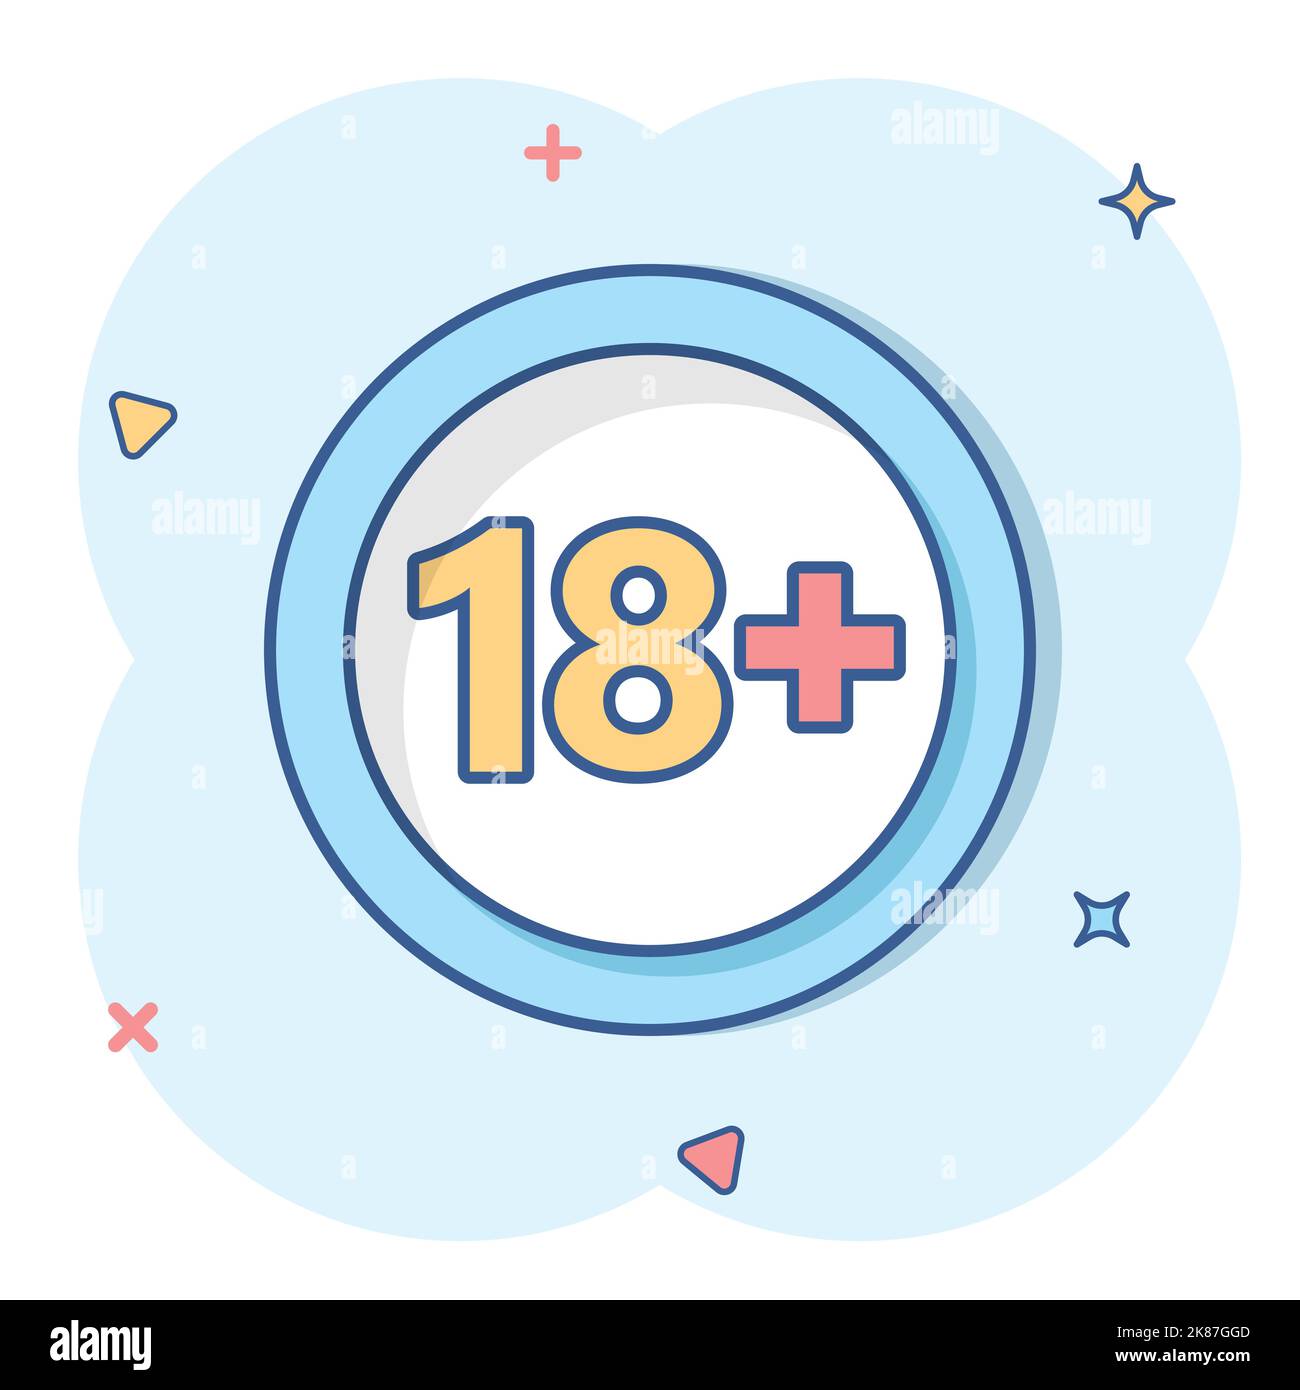 18 plus icon in comic style. Adult only cartoon vector illustration on white isolated background. Forbidden child splash effect business concept. Stock Vector